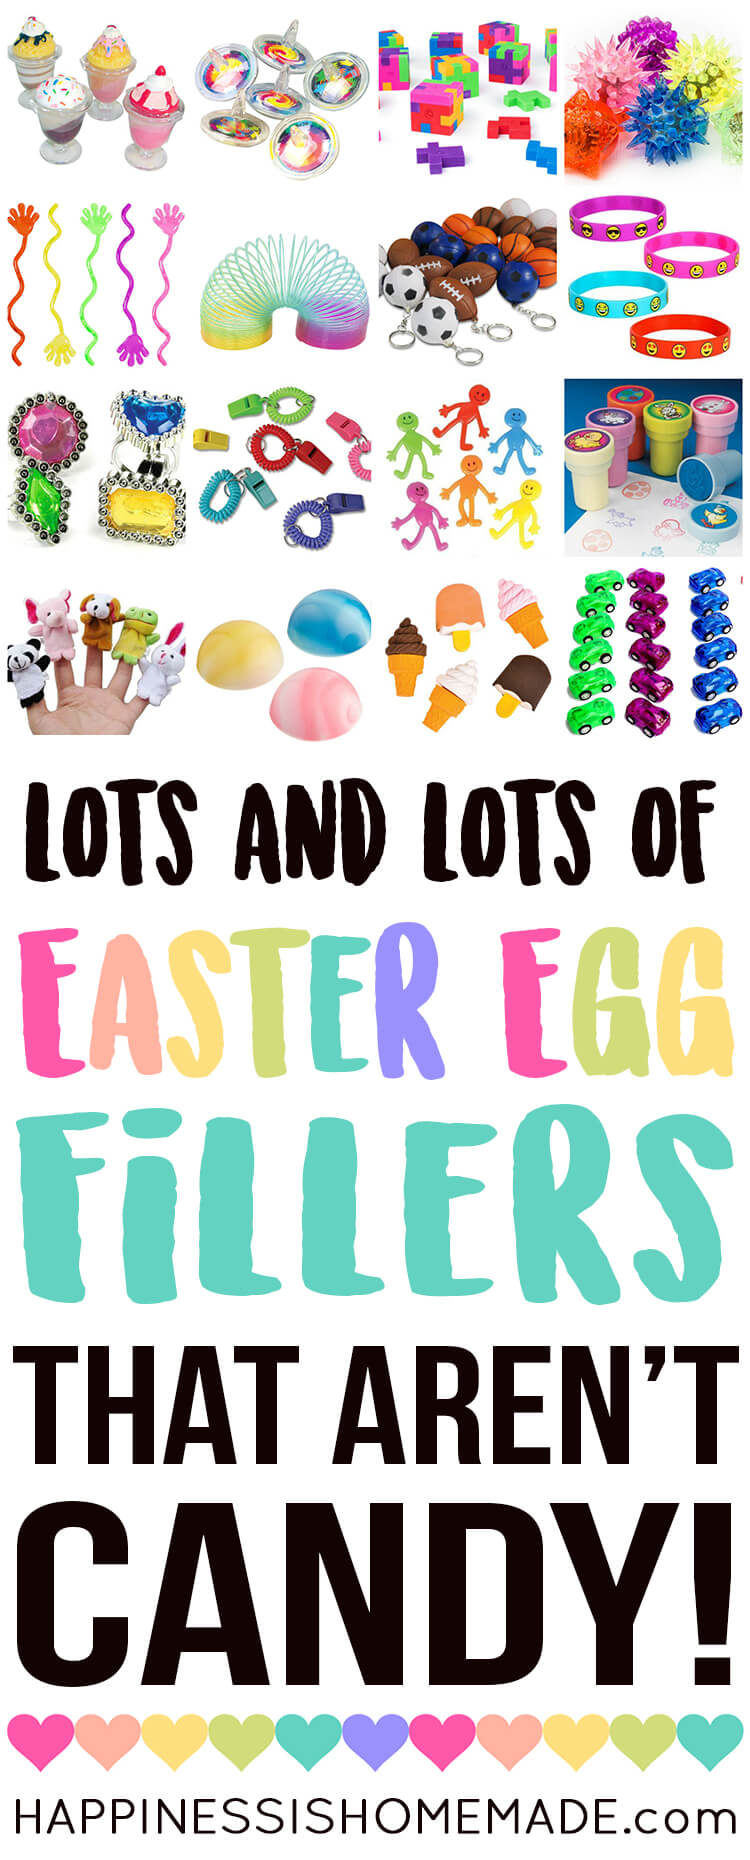 Non-Candy Easter Egg Filler Ideas - 25 Plus Egg Fillers That Aren't Candy - Looking for Easter Egg Filler Ideas that aren't candy? Here are 25+ awesome non-candy Easter Egg fillers that are sure to be a huge hit with your kids! Perfect for Easter egg hunts and baskets!